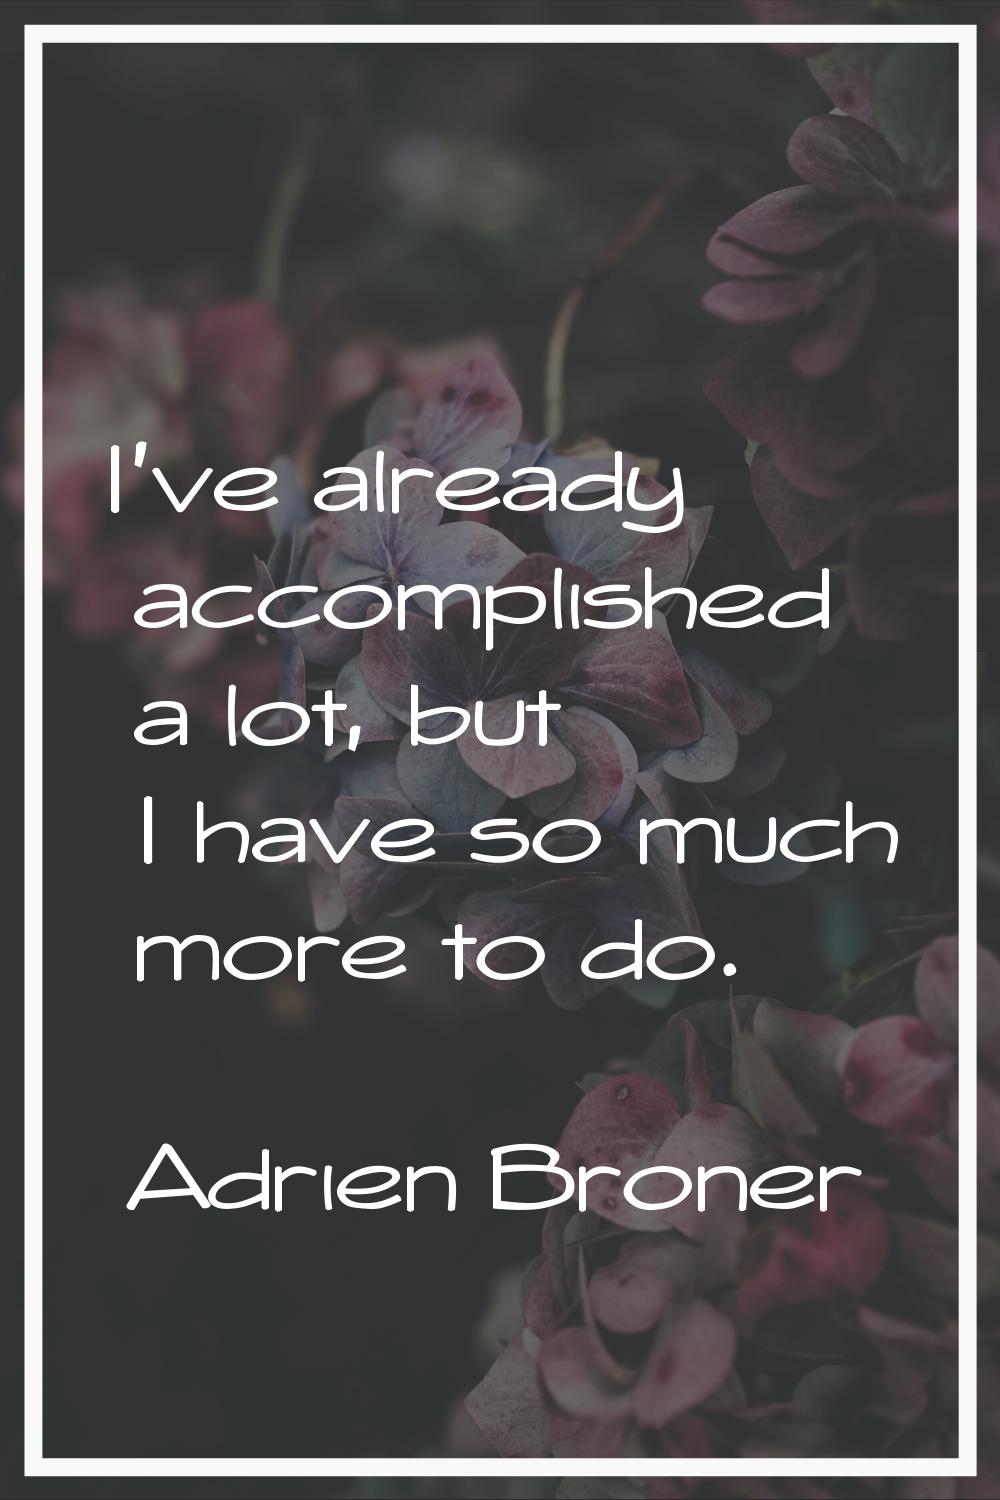 I've already accomplished a lot, but I have so much more to do.